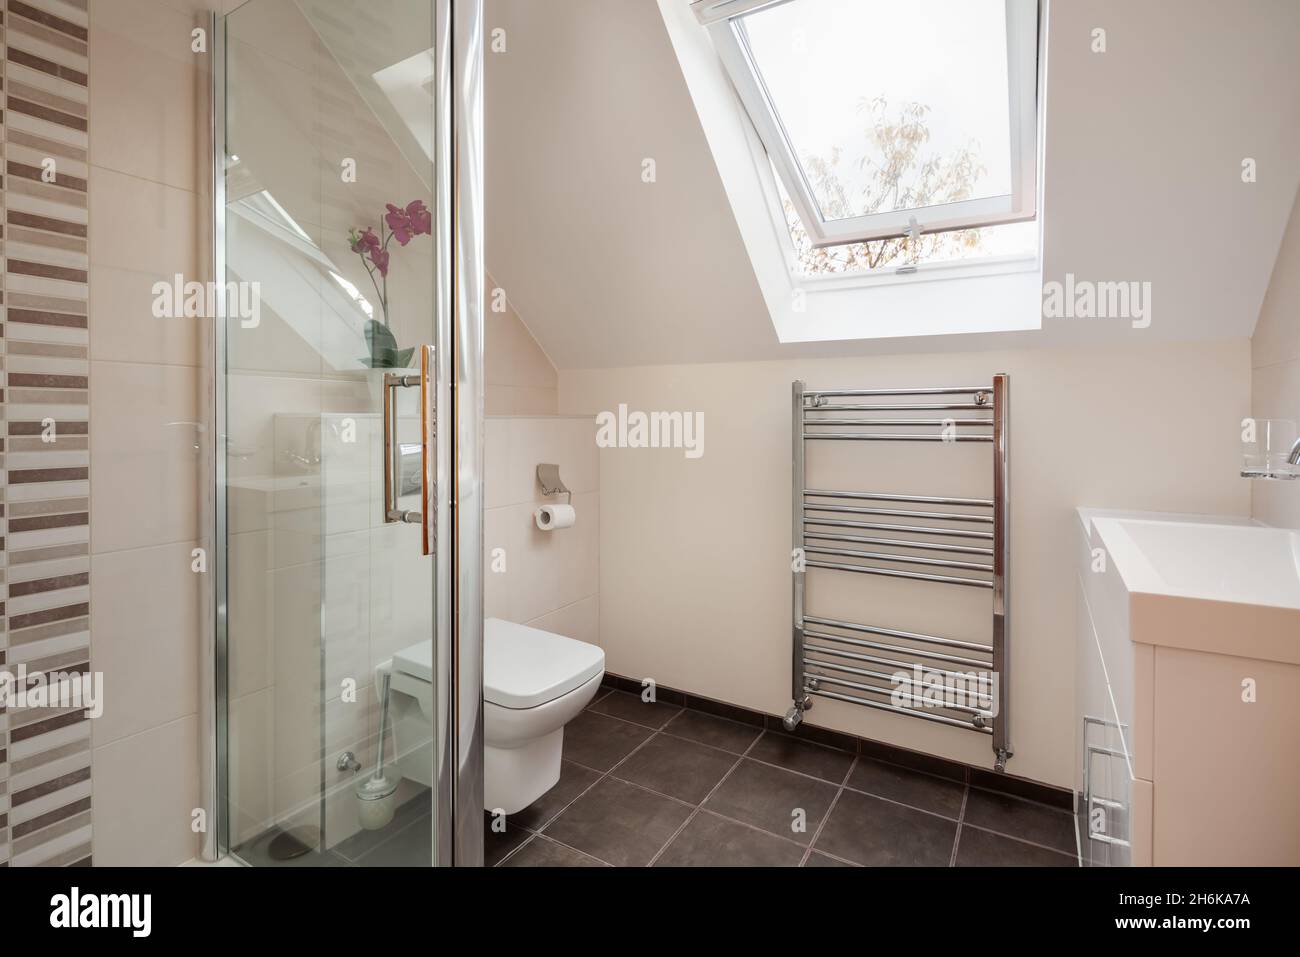 Essex, England - November 18 2019: Contemporary modern tiled bathroom shower room with ceramic sink, towel rail and toilet wc Stock Photo